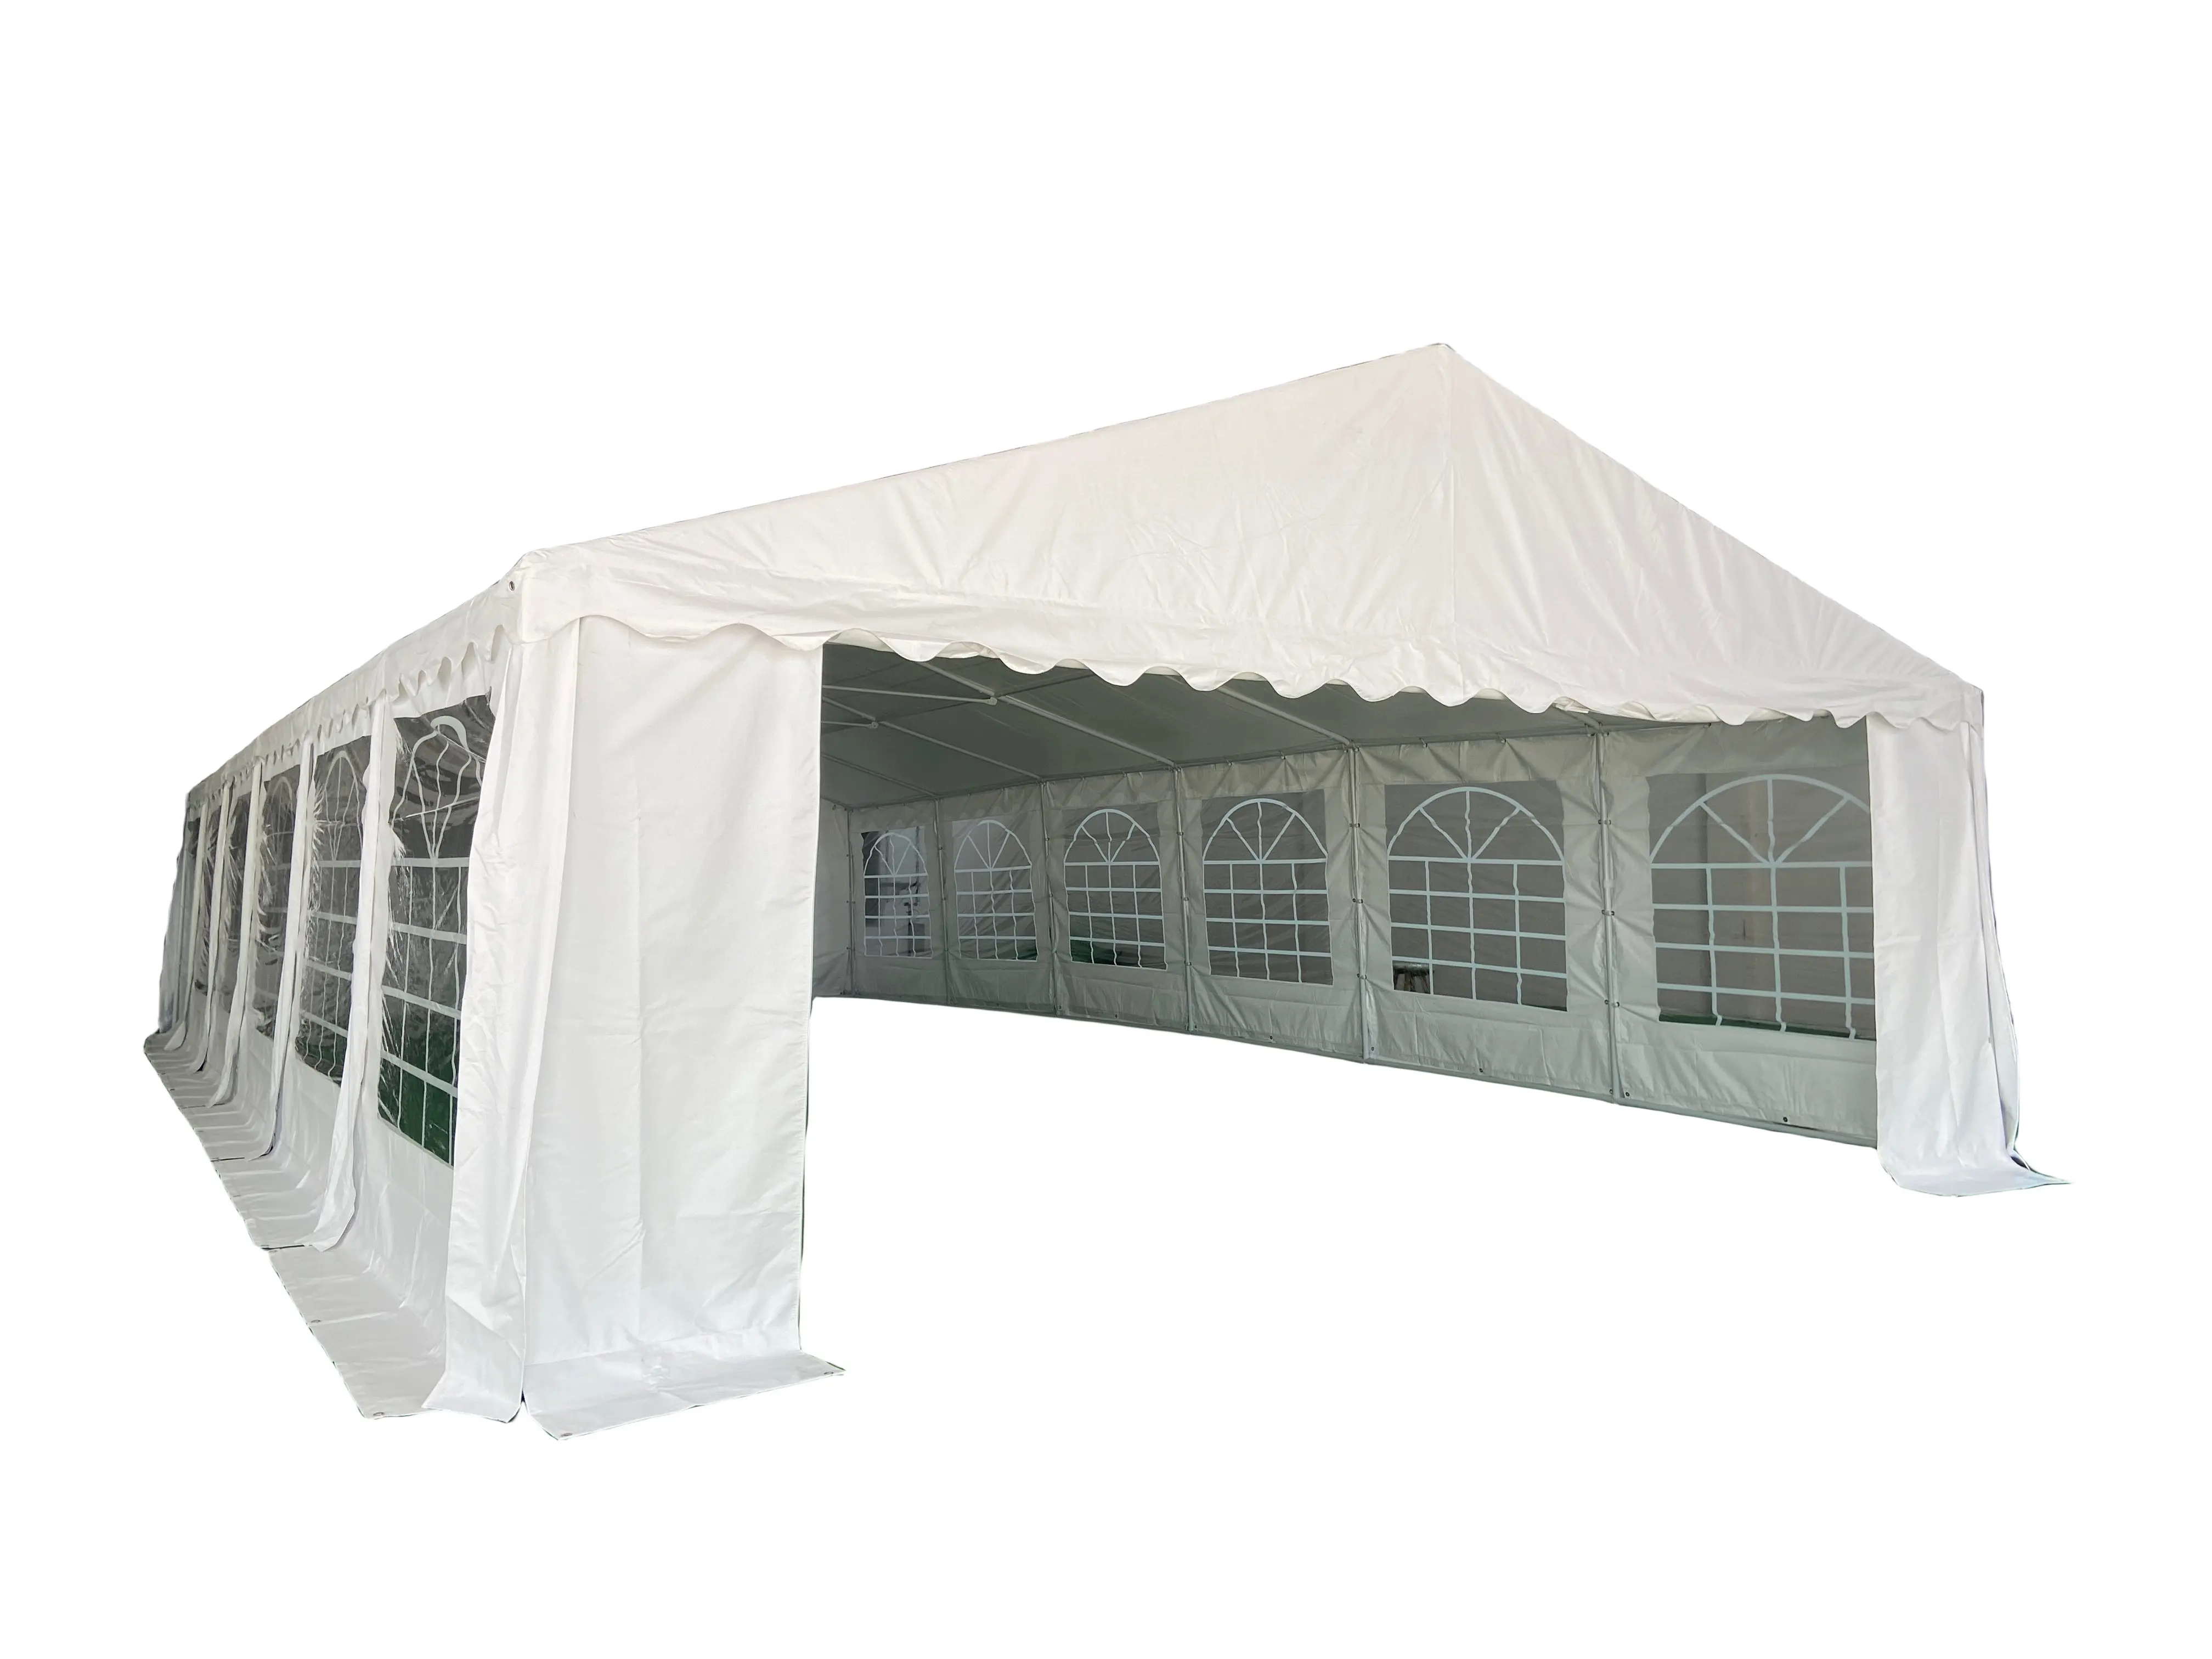 6x12m marquee tent for 500 people 40 x 20 ft pvc family party water drop star canvas tents luxury